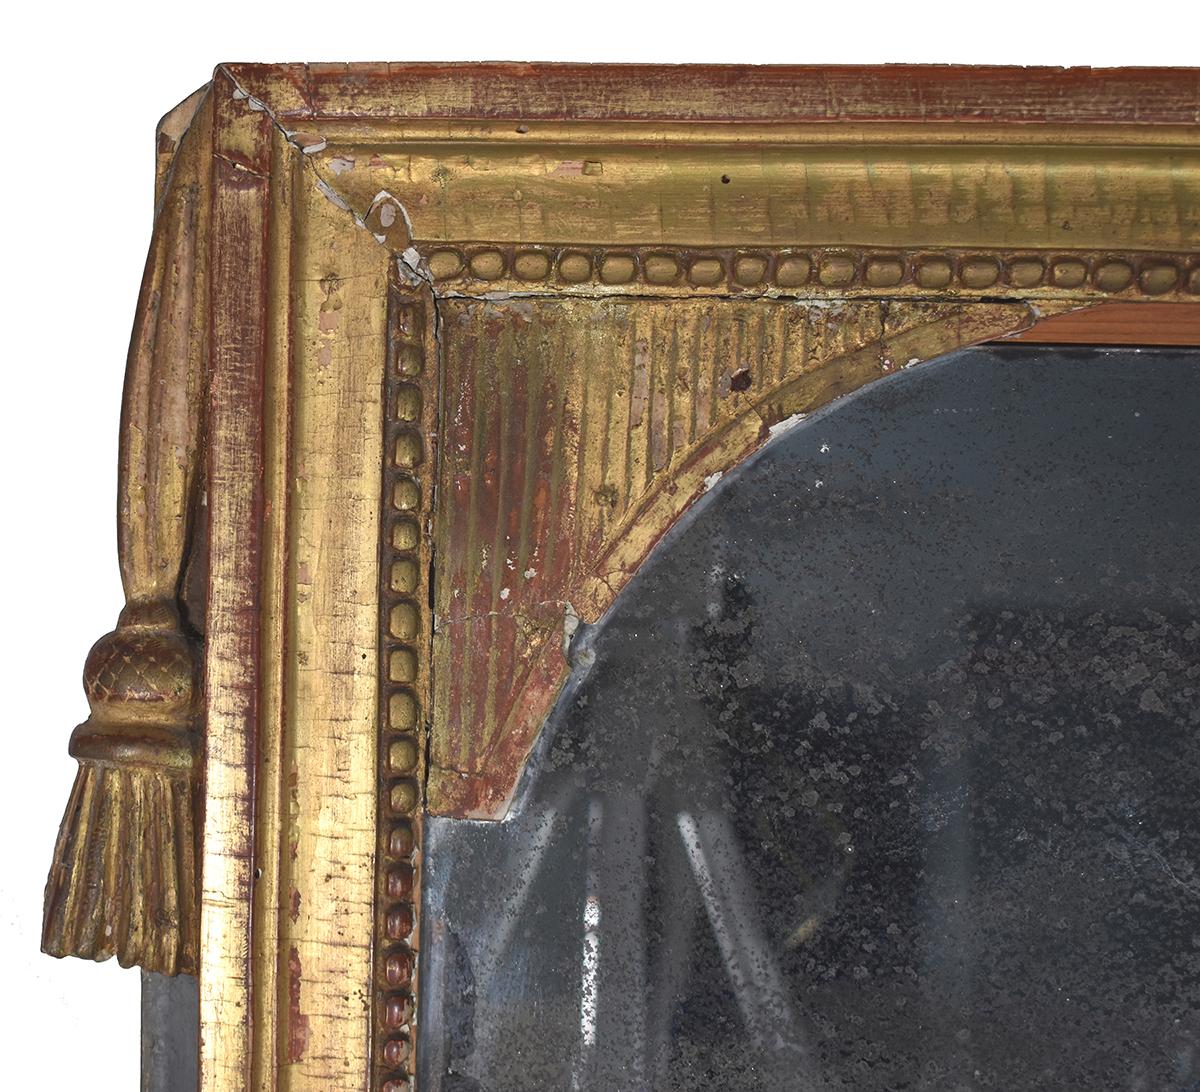 This French 18th century Louis XVI gold gilt mirror has detailed neoclassical tassel carving. Could be the original mirror but unsure of age.
   